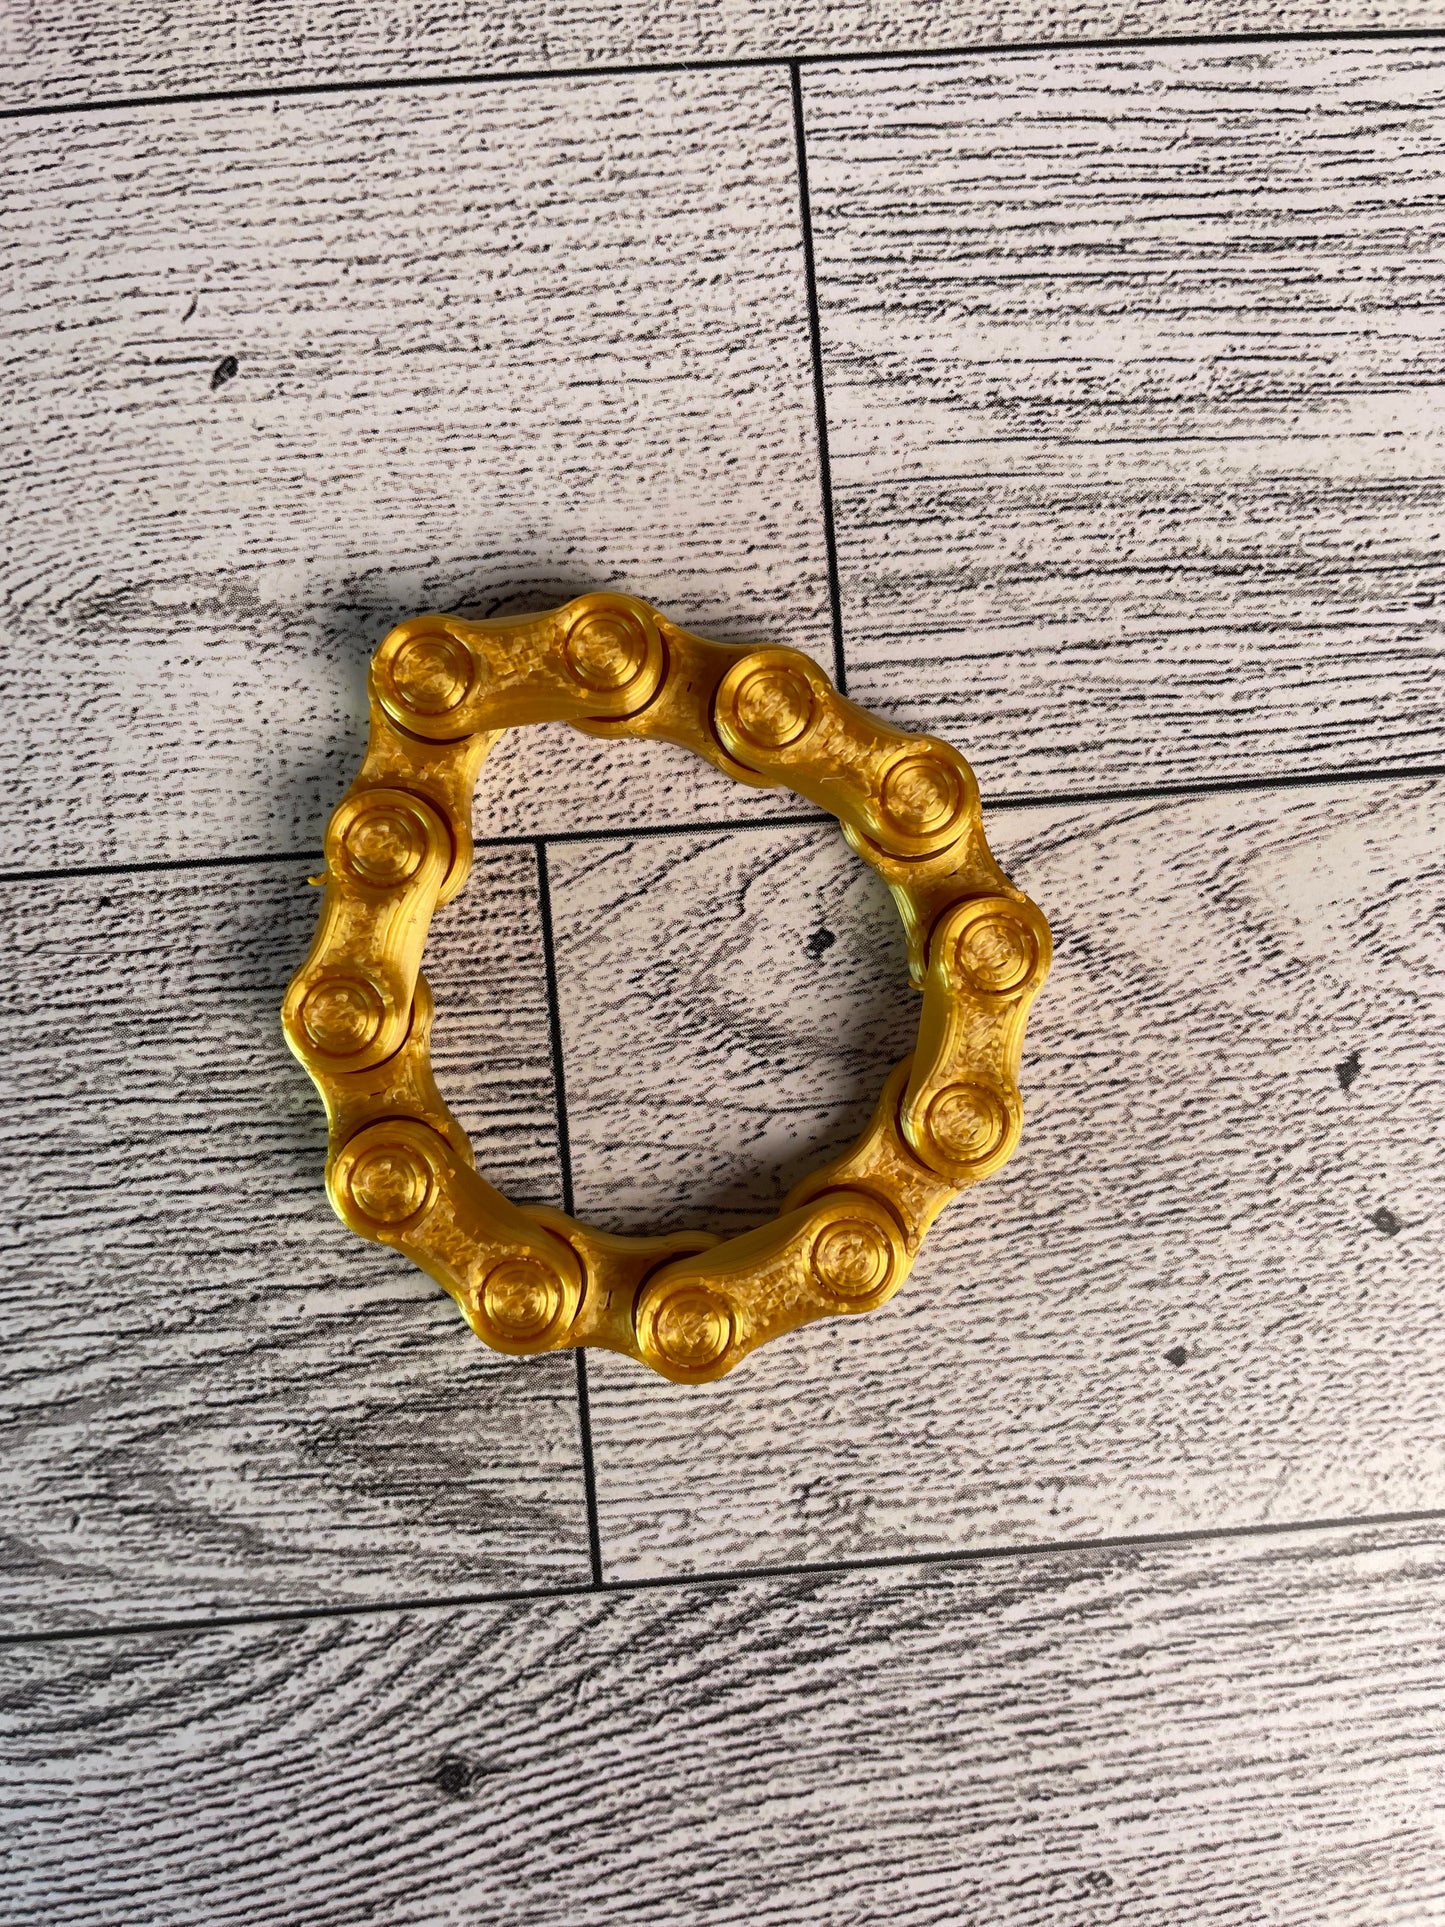 A gold chain link on a wood backdrop. The chain is arranged in a circle shape and there are six links.